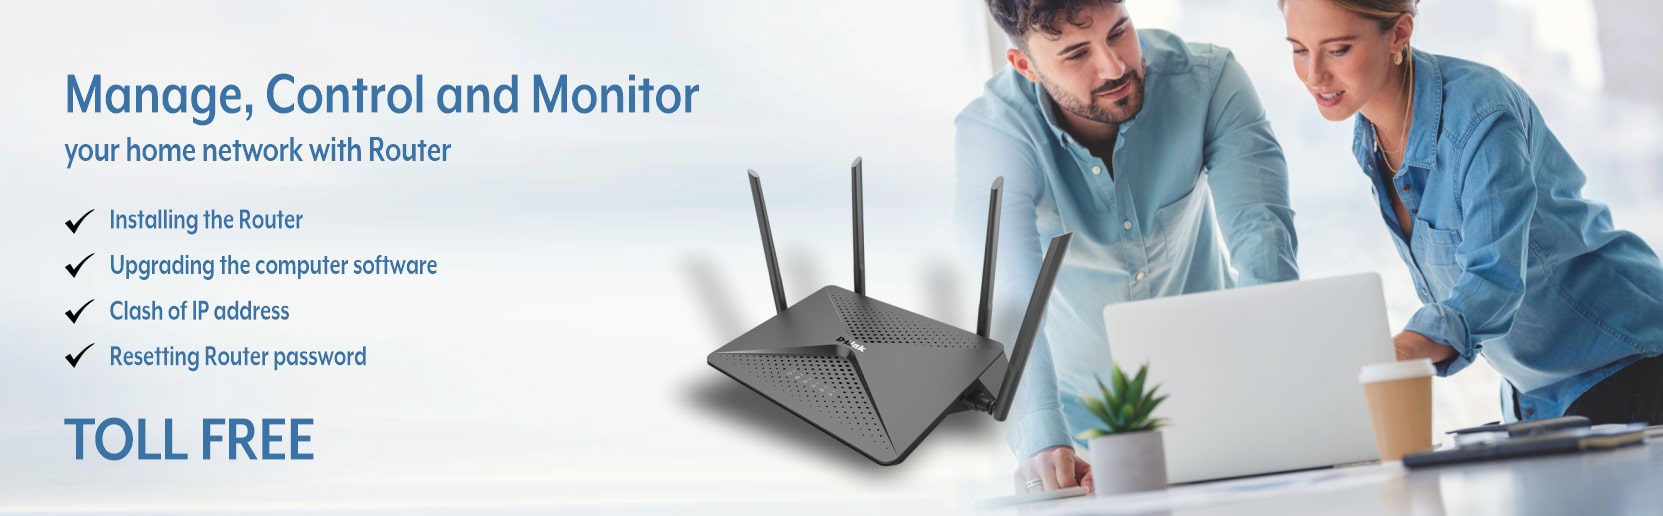 dlink router support min